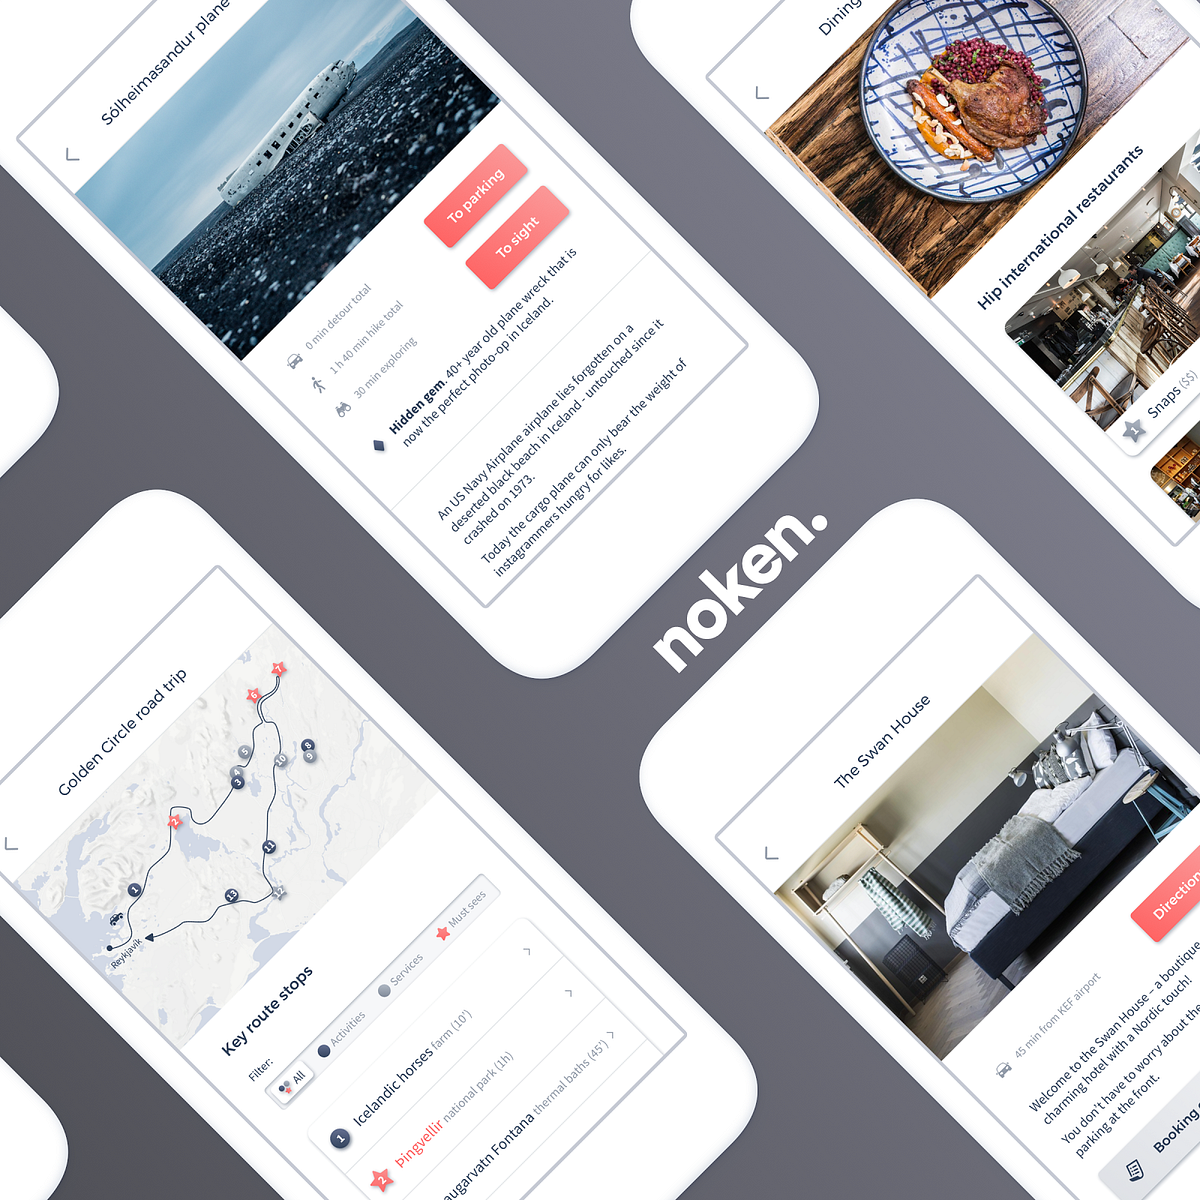  Noken  s Travel  App Makes Planning a Trip to Iceland A Breeze